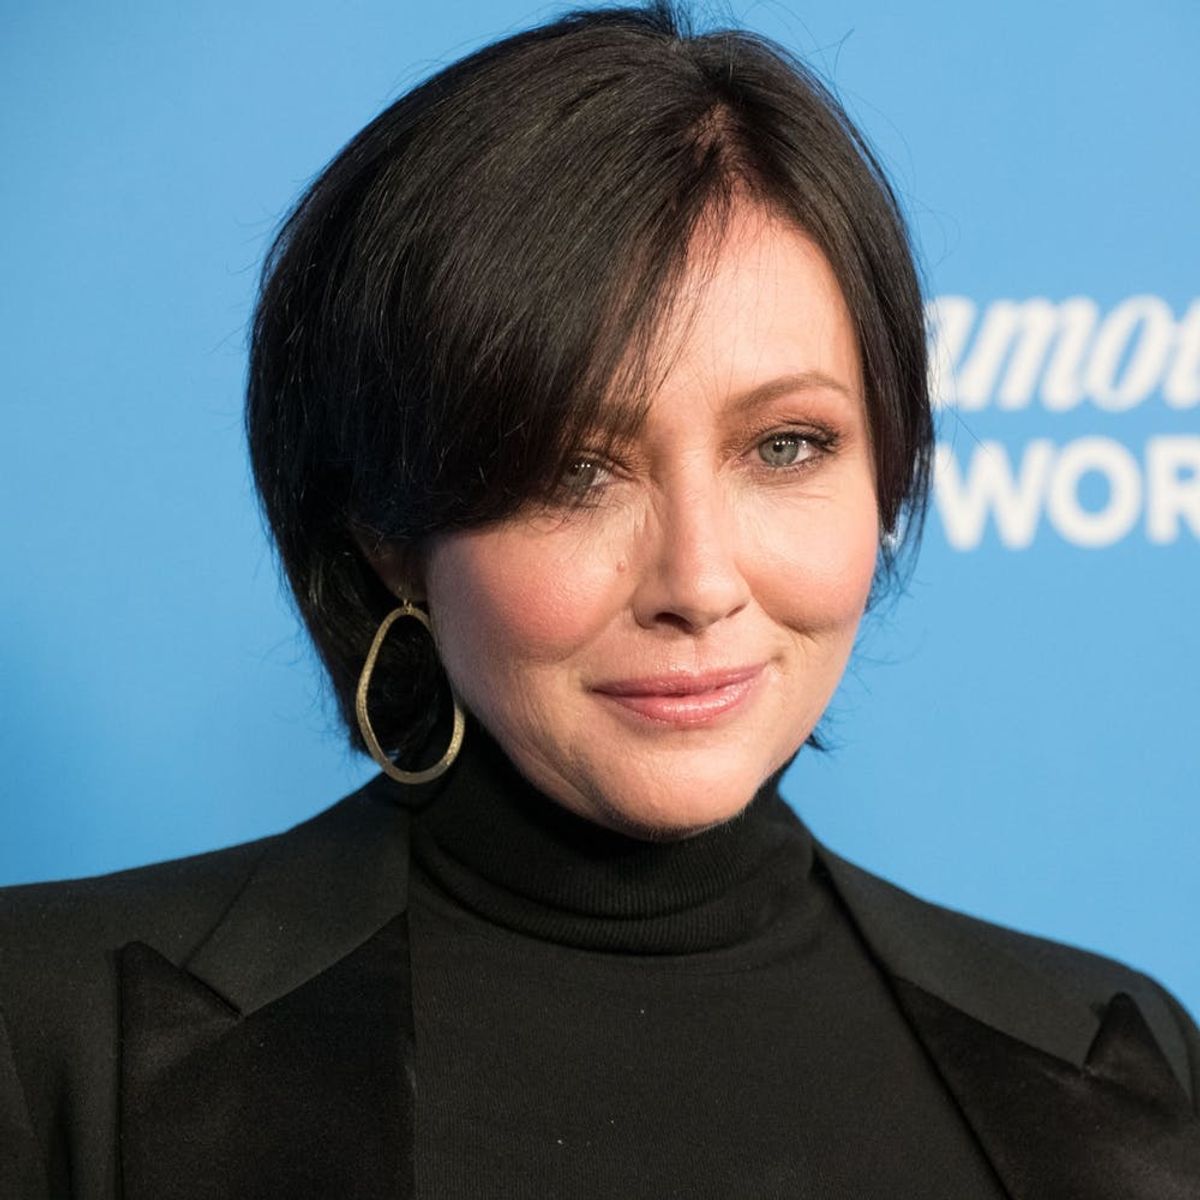 Shannen Doherty Sounds Off on the ‘Charmed’ Reboot’s ‘Offensive’ Description